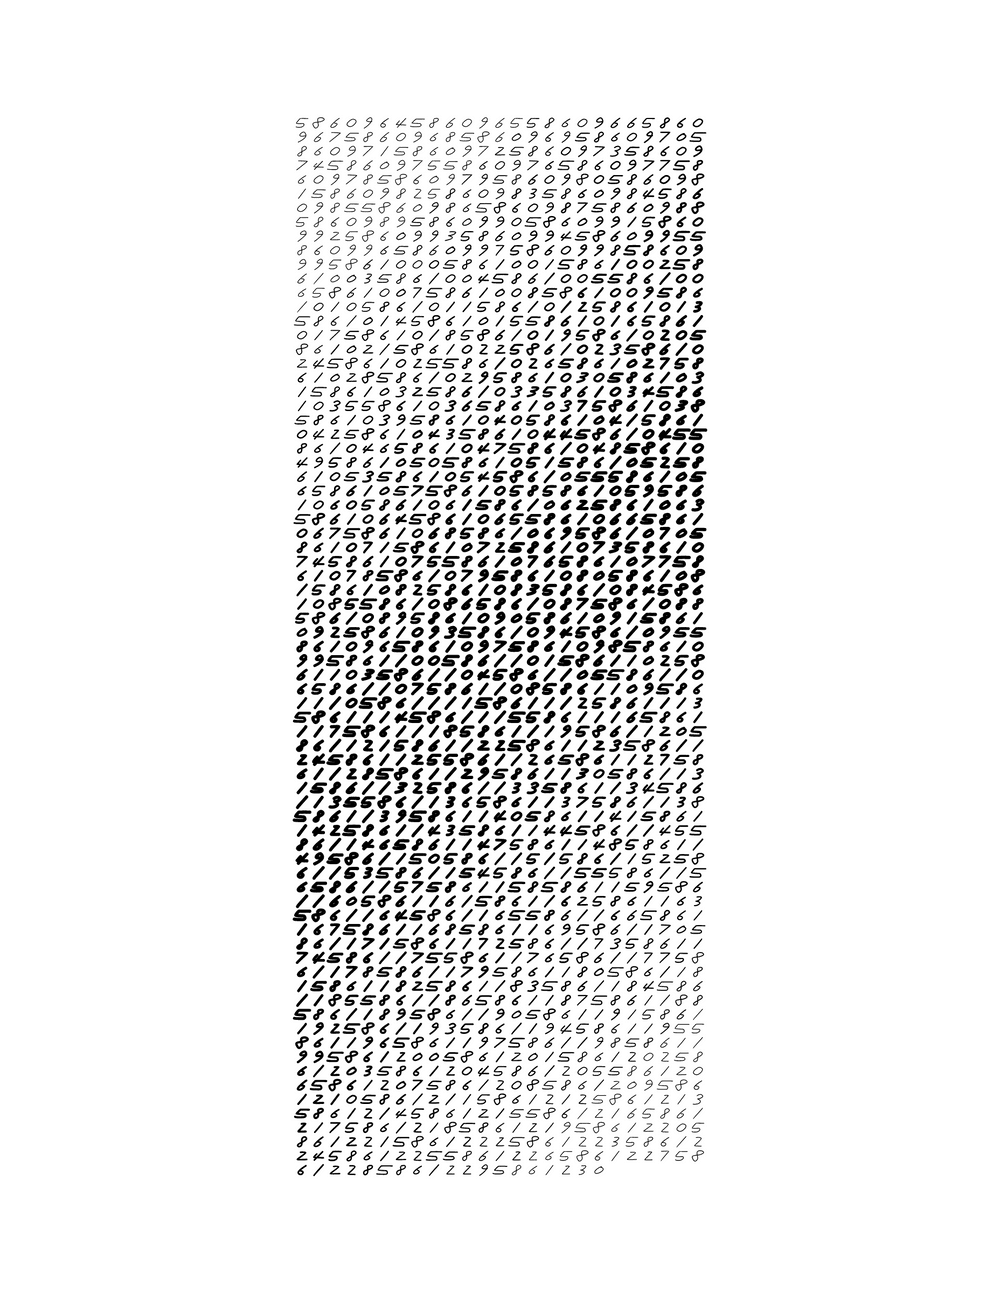 Endless (5,607,250 to Infinity) #860